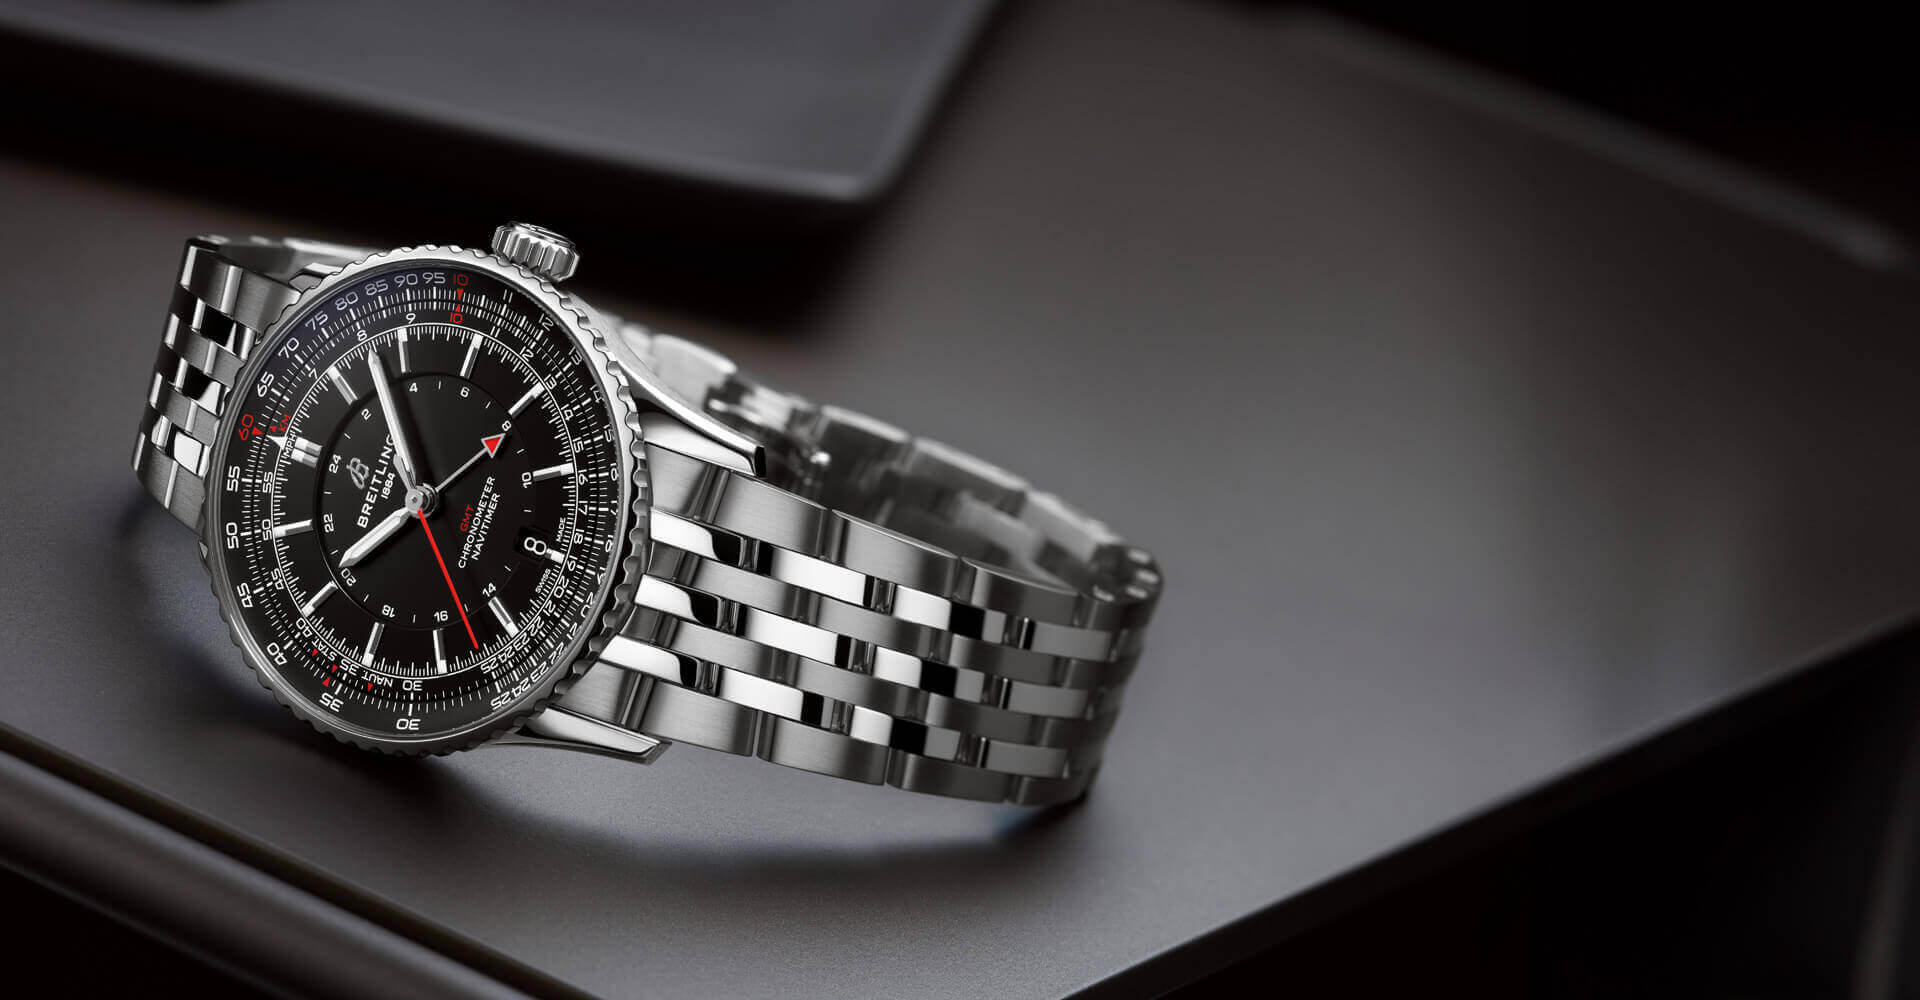 <h2>BREITLING</h2>

<h3>NAVITIMER COLLECTIE</h3>
